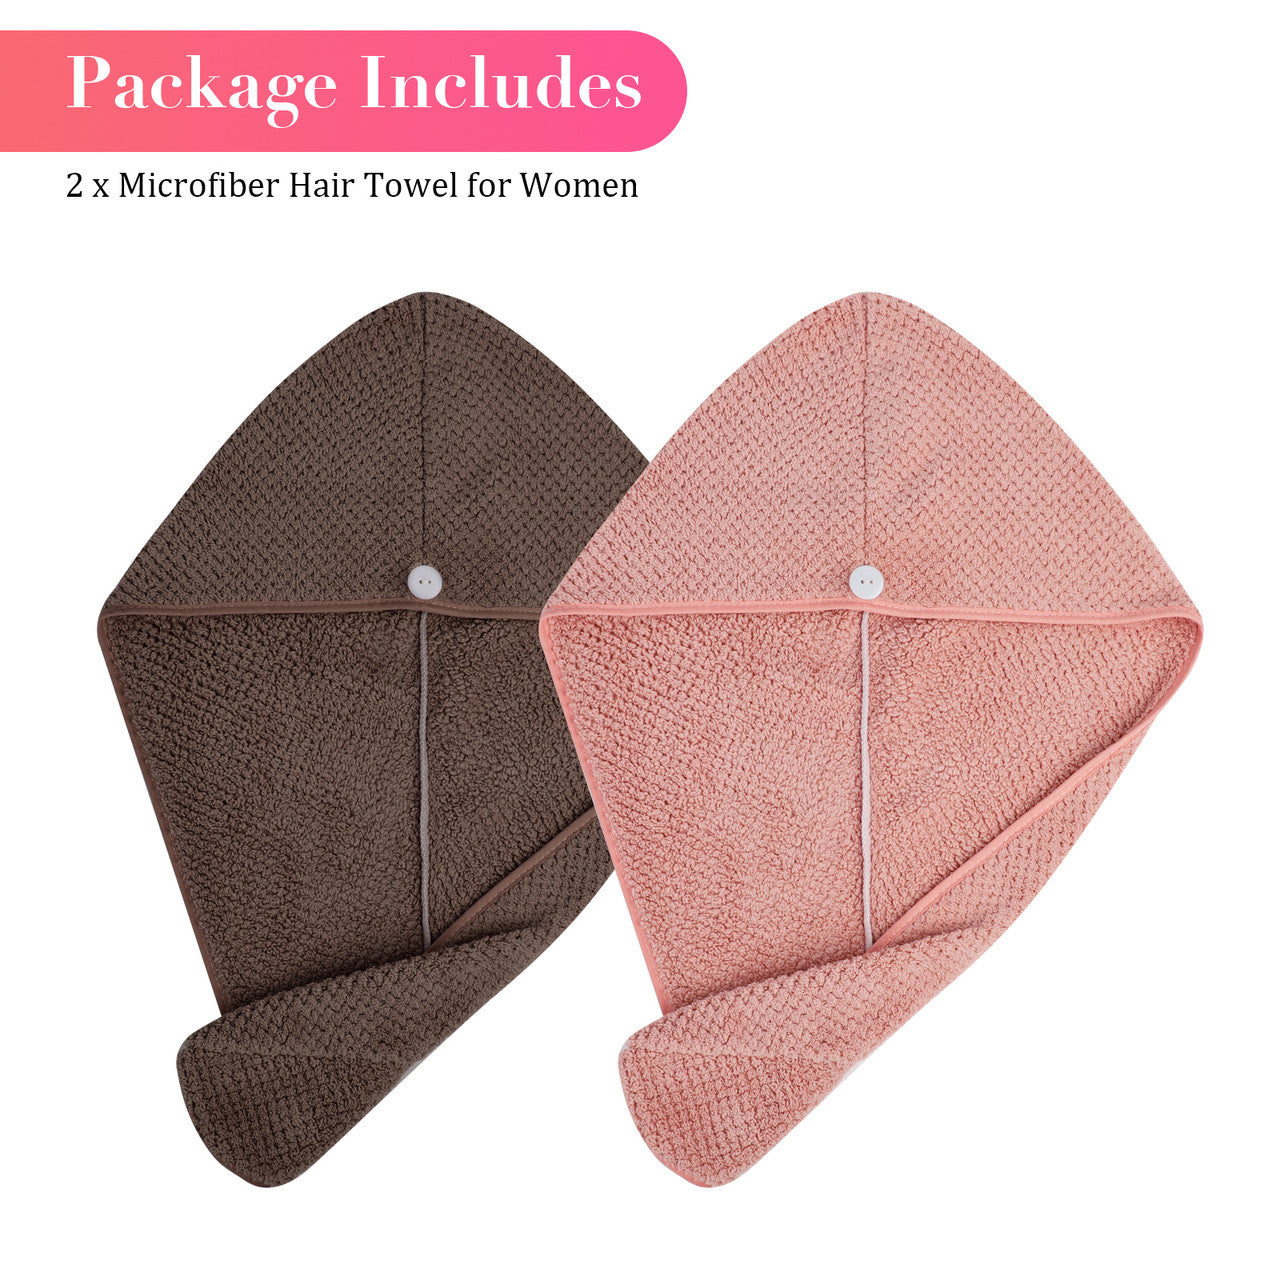 2 PCS Microfiber Hair Towel Wrap for Women - Super Anti-Frizz Absorbent Quick Dry Hair Turban for Drying Curly, Long & Thick Hair (Dark Pink, Dark brown)